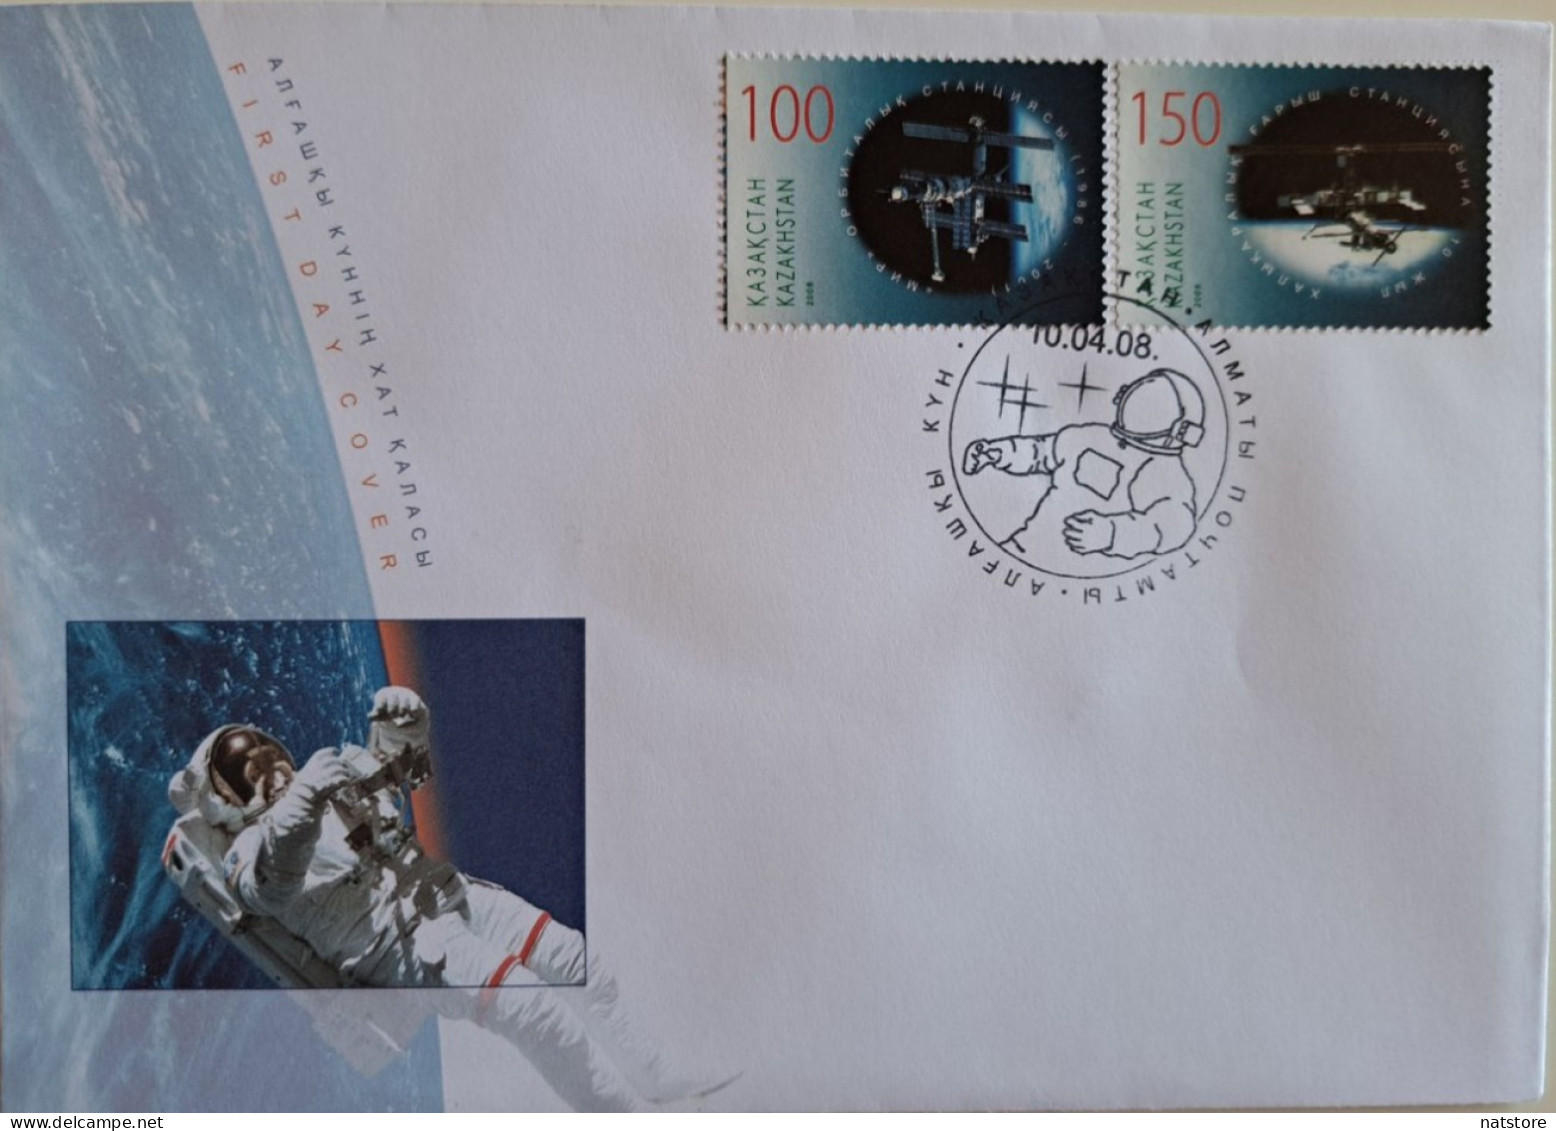 2008..KAZAKHSTAN...FDC WITH  STAMPS...NEW...Cosmonautics Day.....RARE!!! - Asie